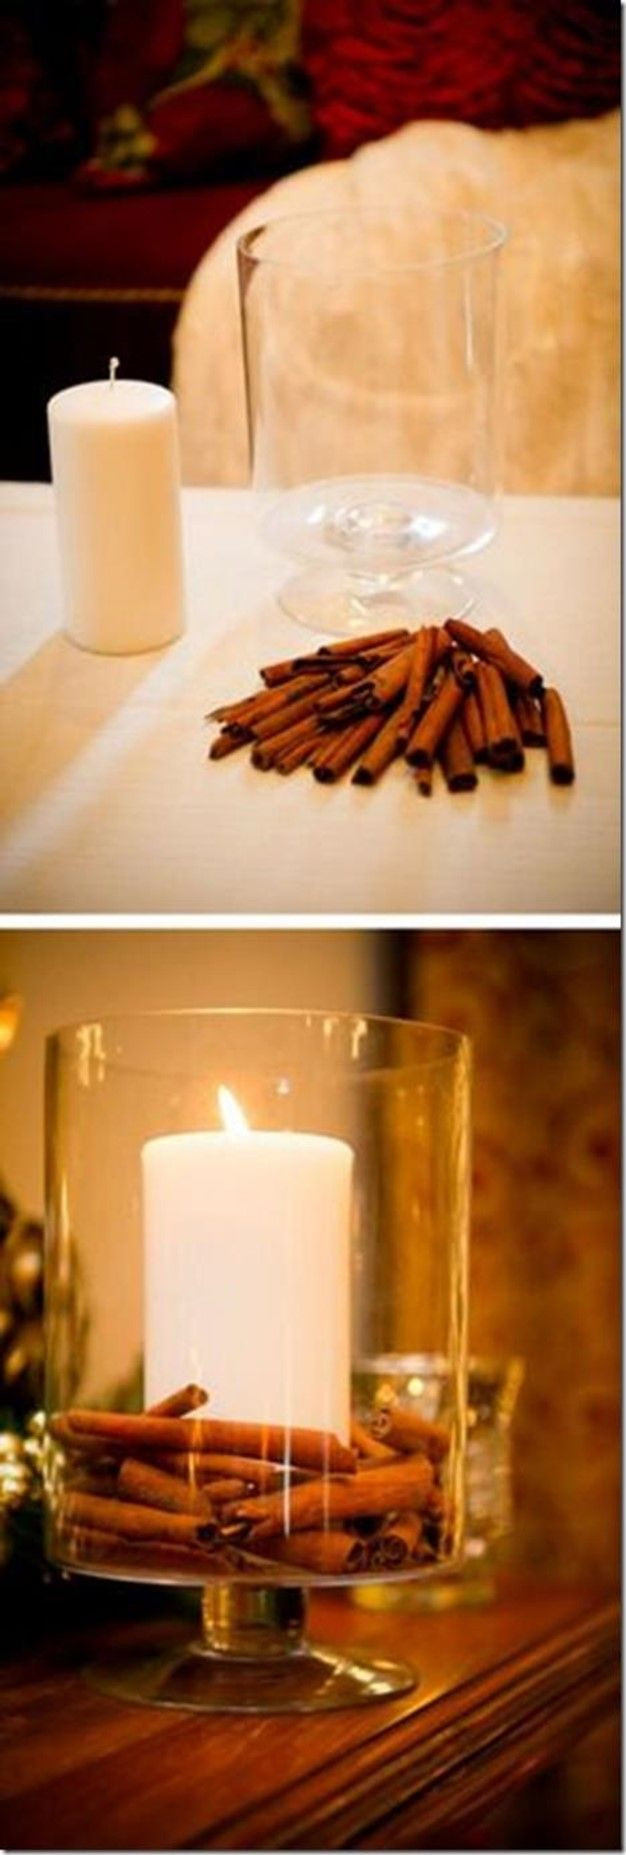 Inexpensive Thanksgiving Table Decorations
 Best 25 Cheap thanksgiving decorations ideas on Pinterest